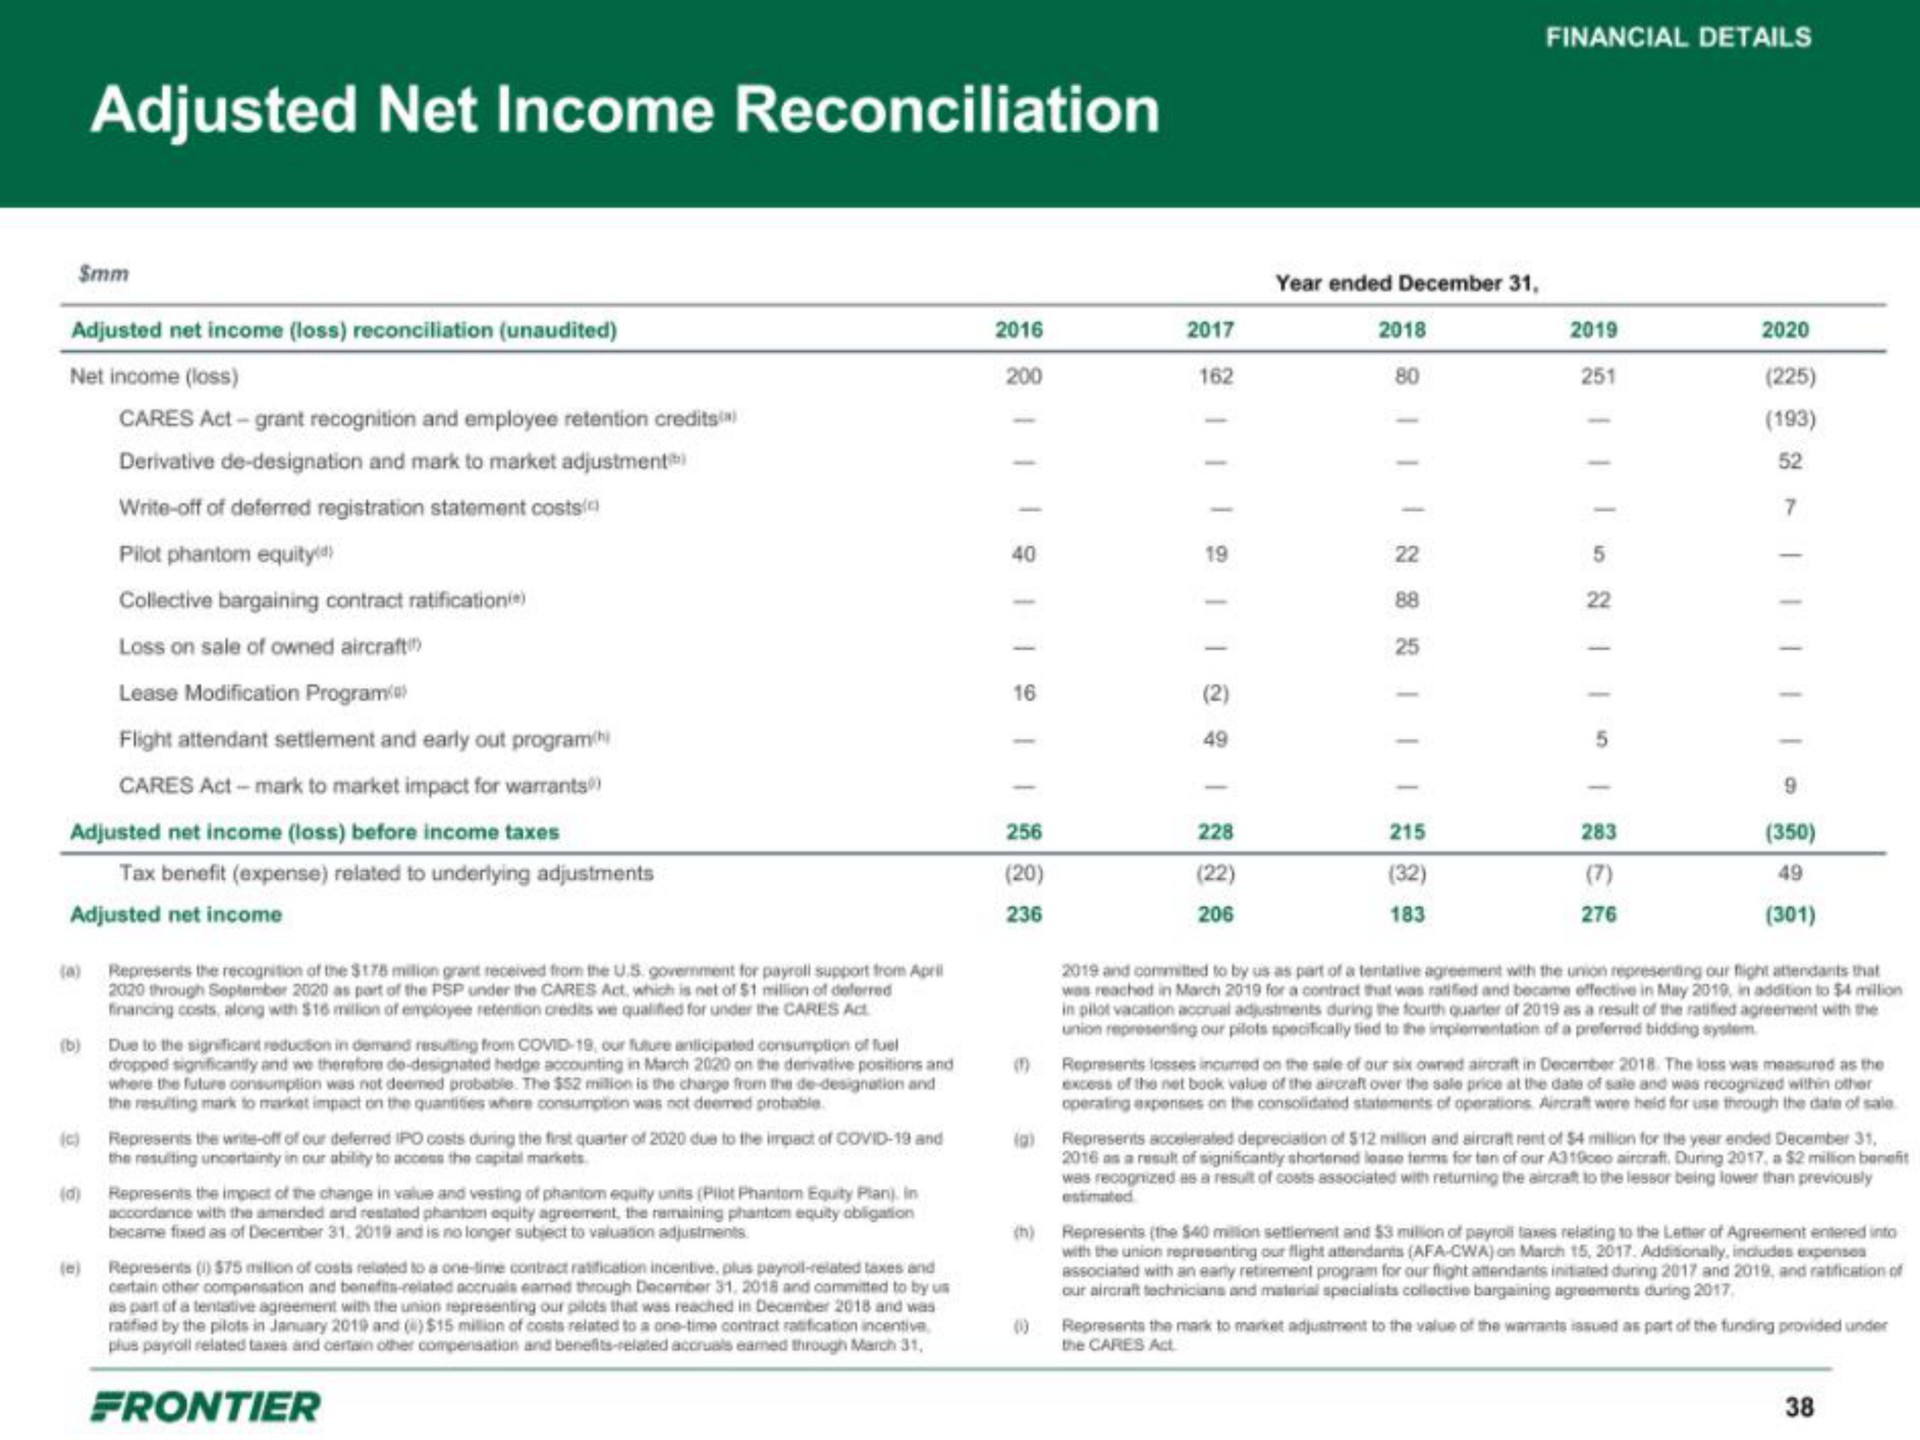 adjusted net income reconciliation | Frontier